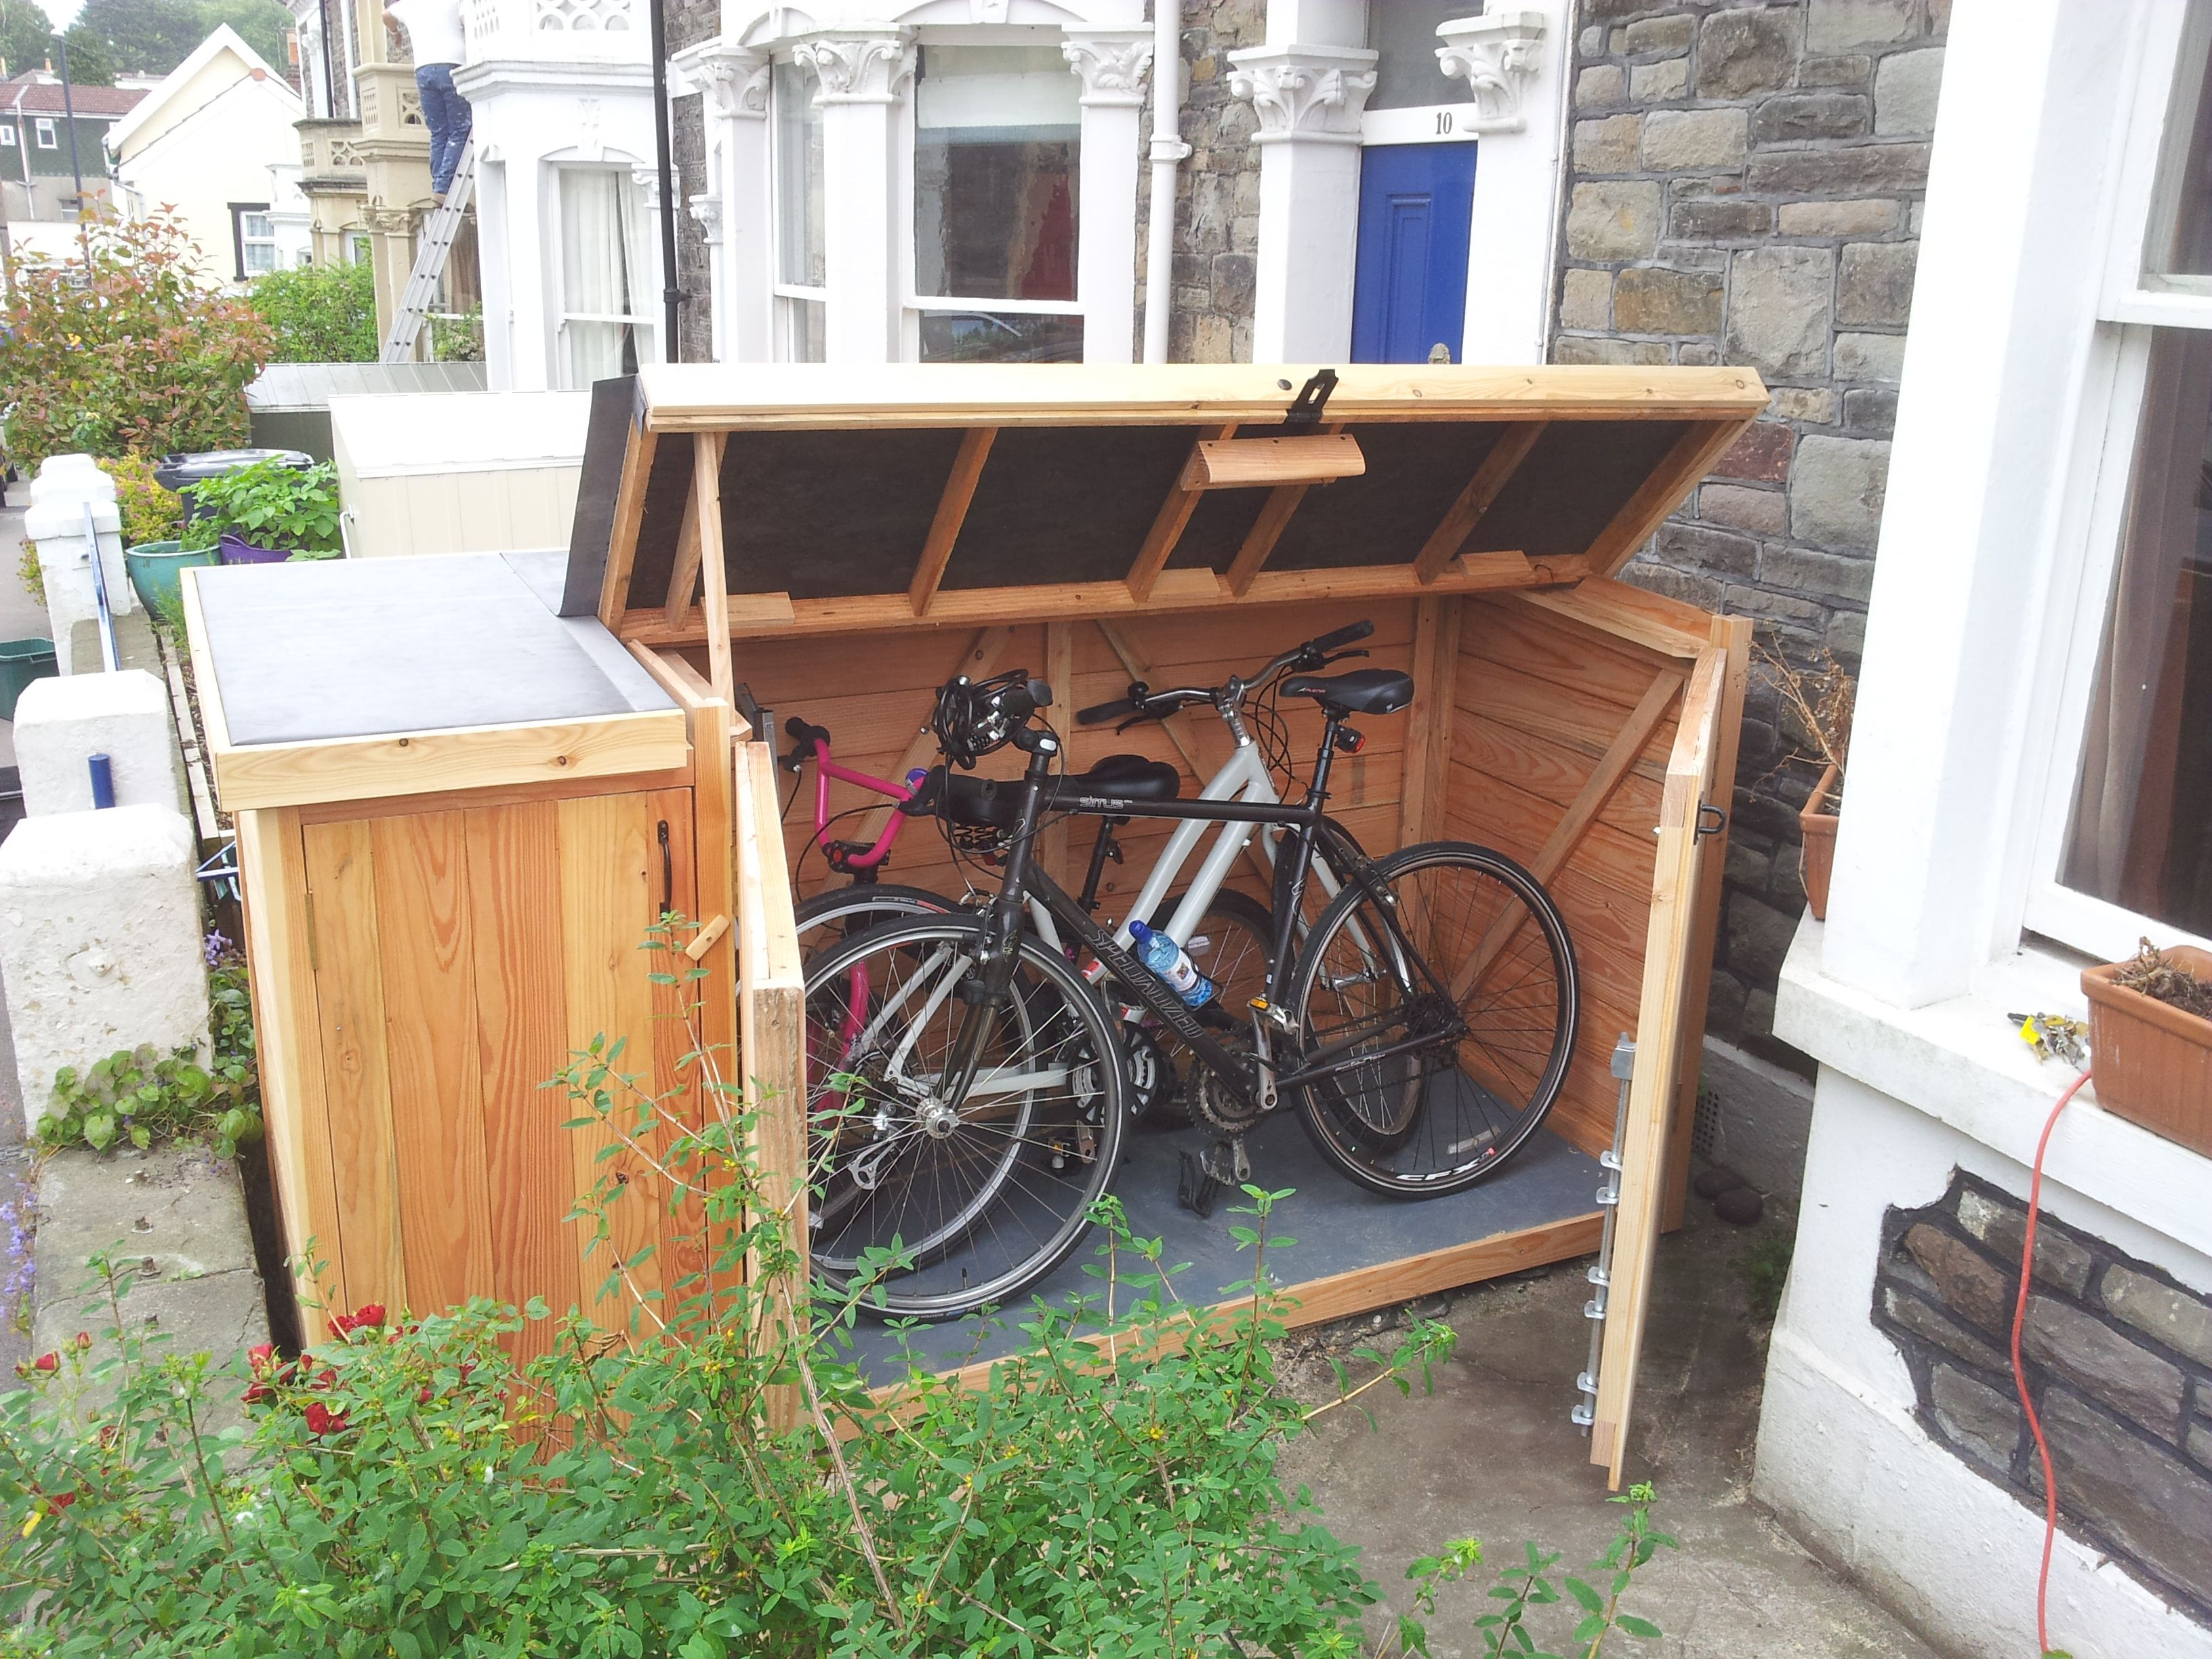 Practical Stylish And Secure The Bike Shed Company Gardening intended for sizing 3264 X 2448